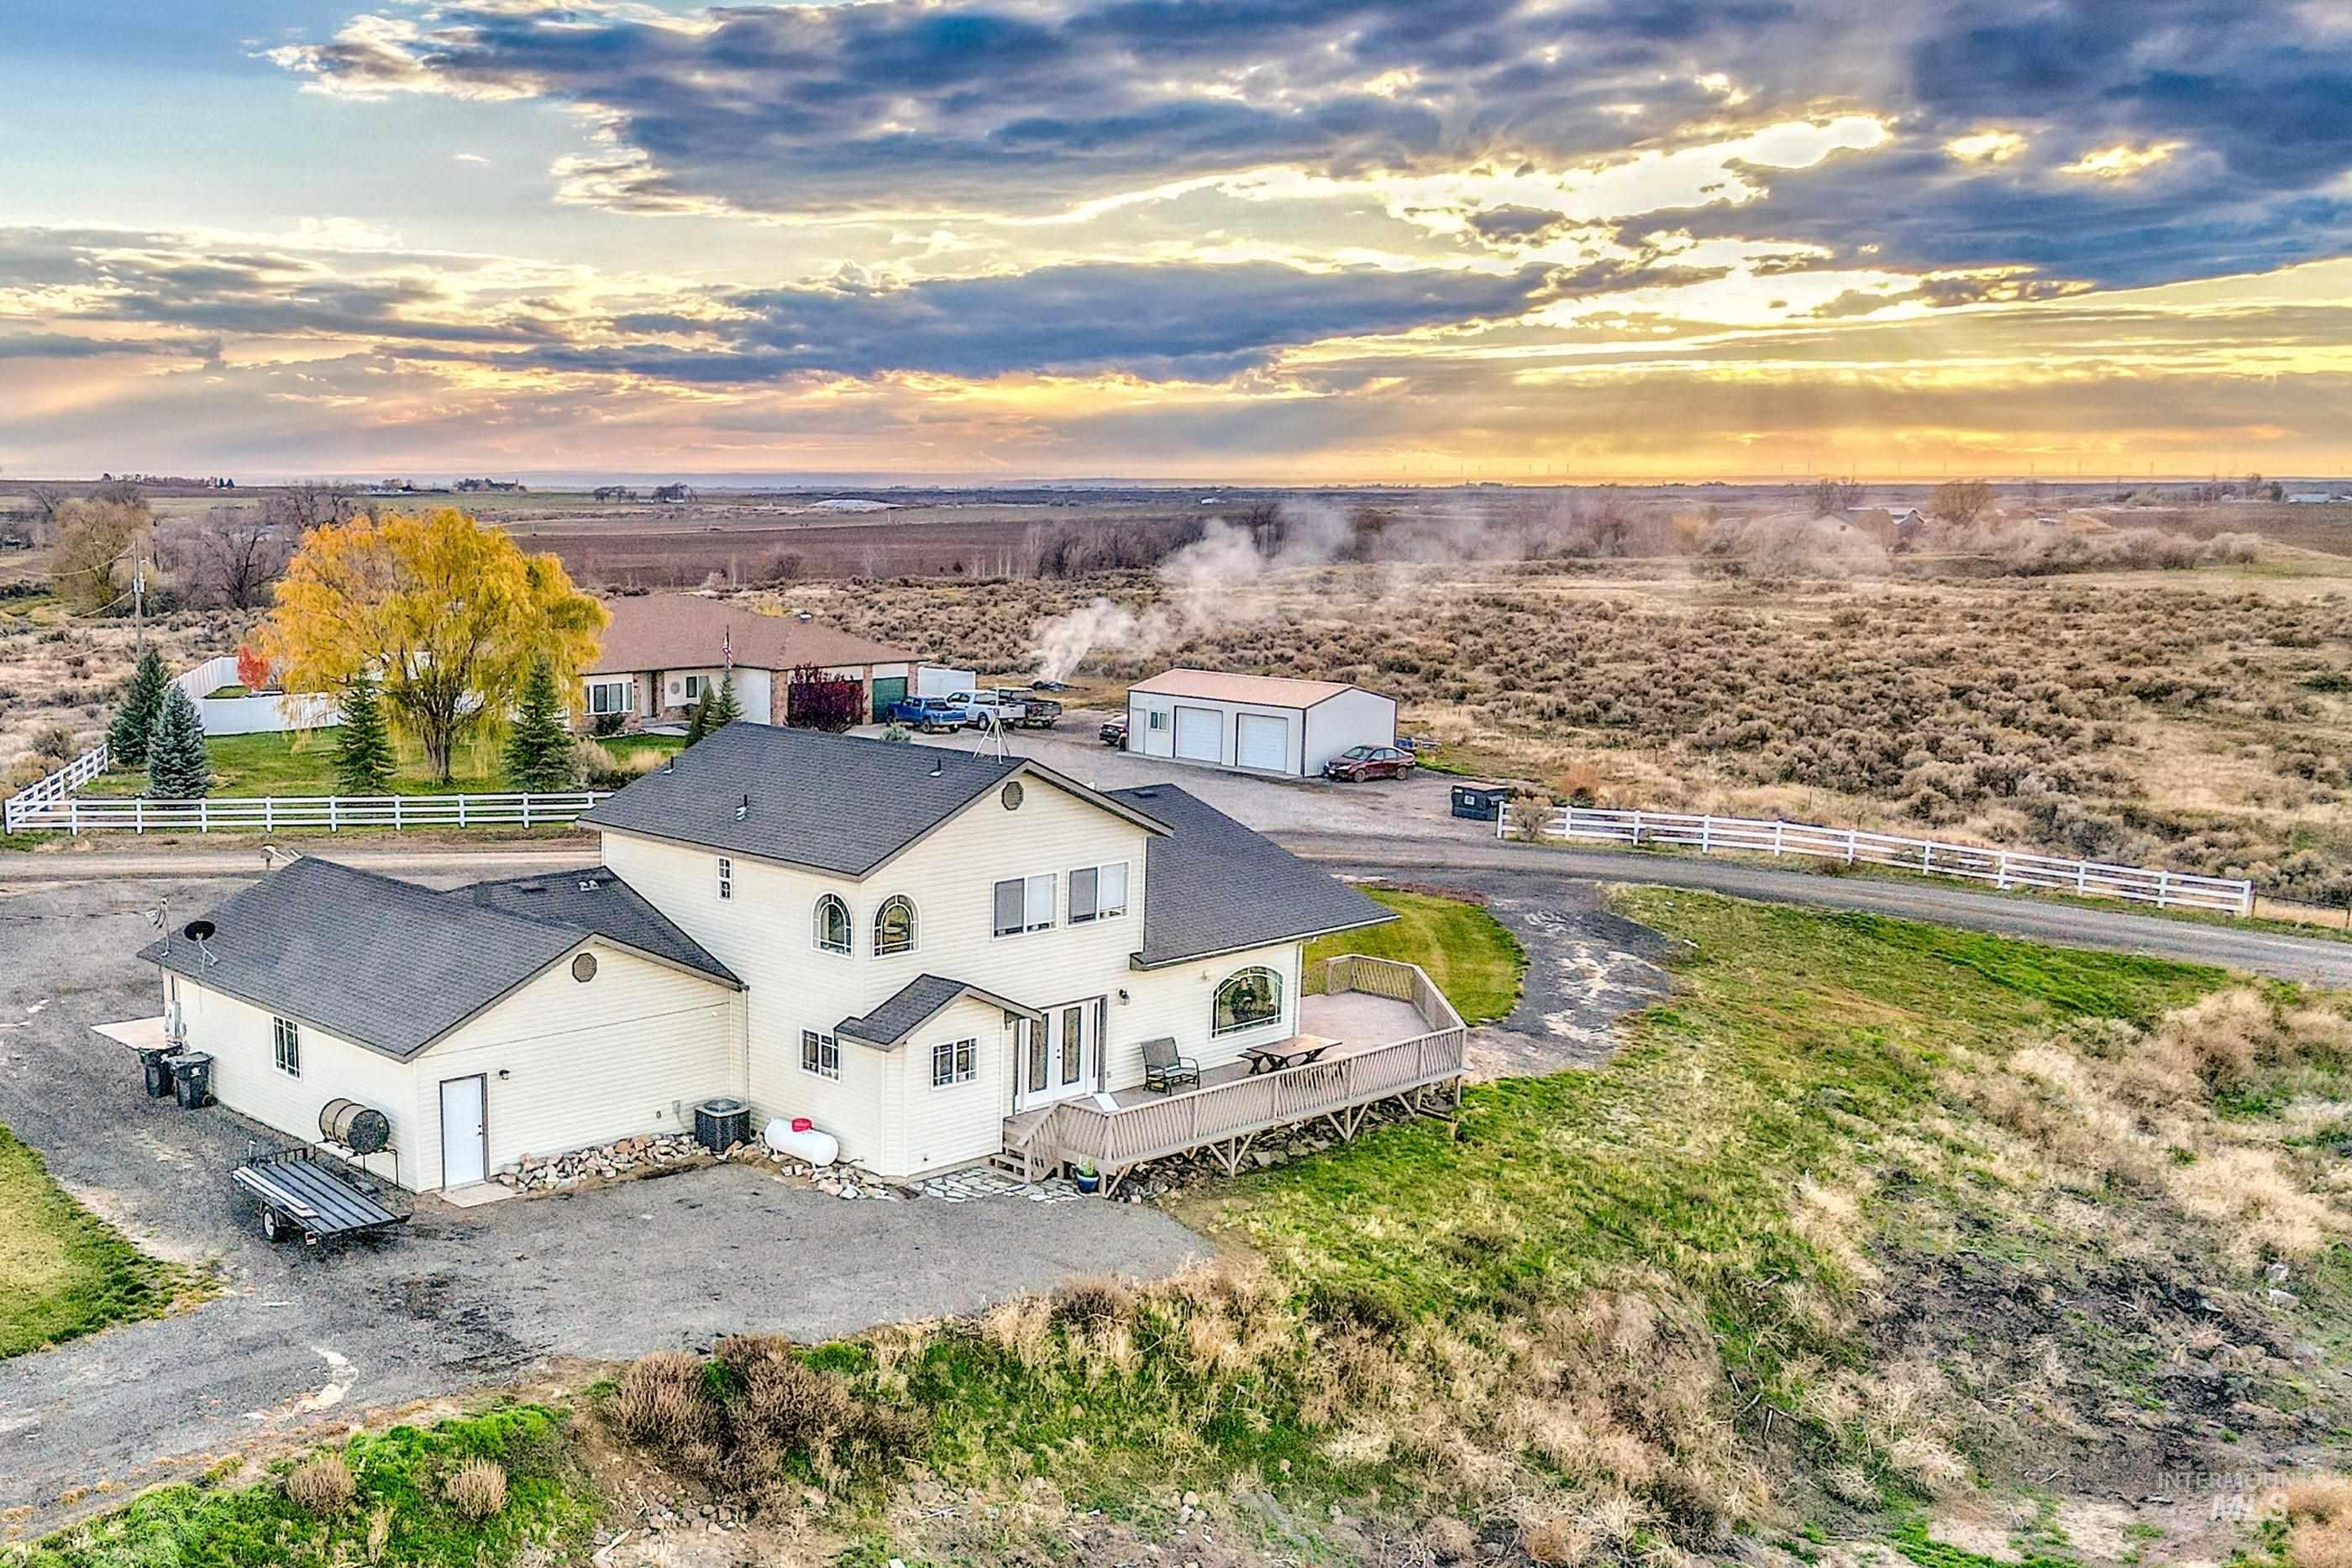 560 Riverview Dr., Gooding, Idaho 83330, 4 Bedrooms, 2.5 Bathrooms, Residential For Sale, Price $650,000,MLS 98898876